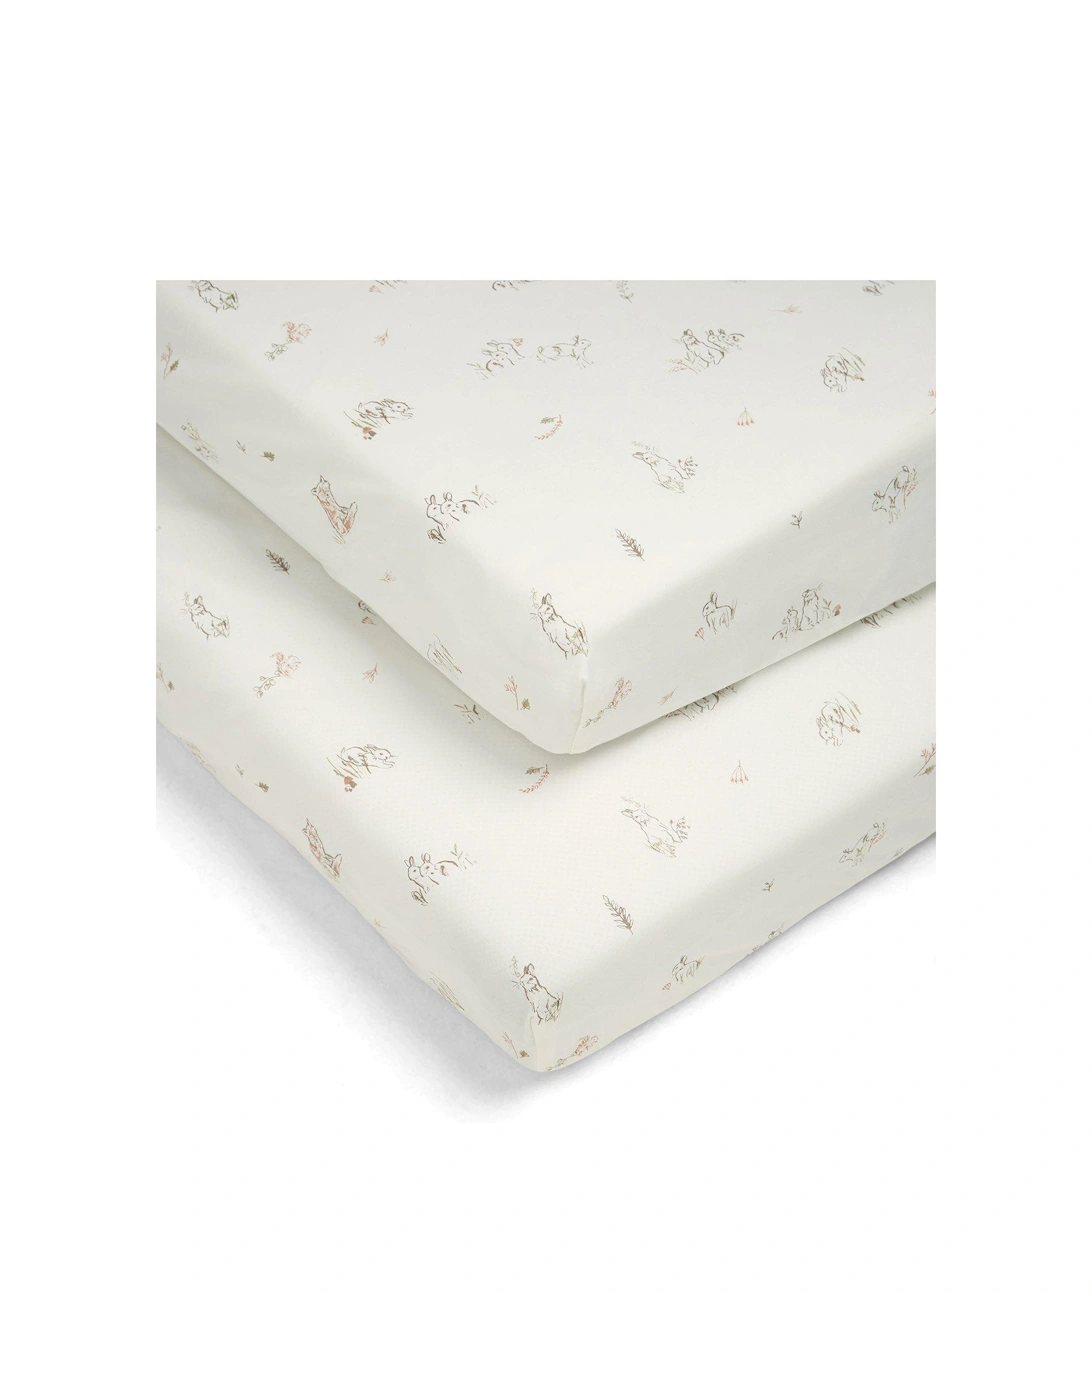 2 Cot/Bed Fitted Sheets - Bunny/Fox, 3 of 2